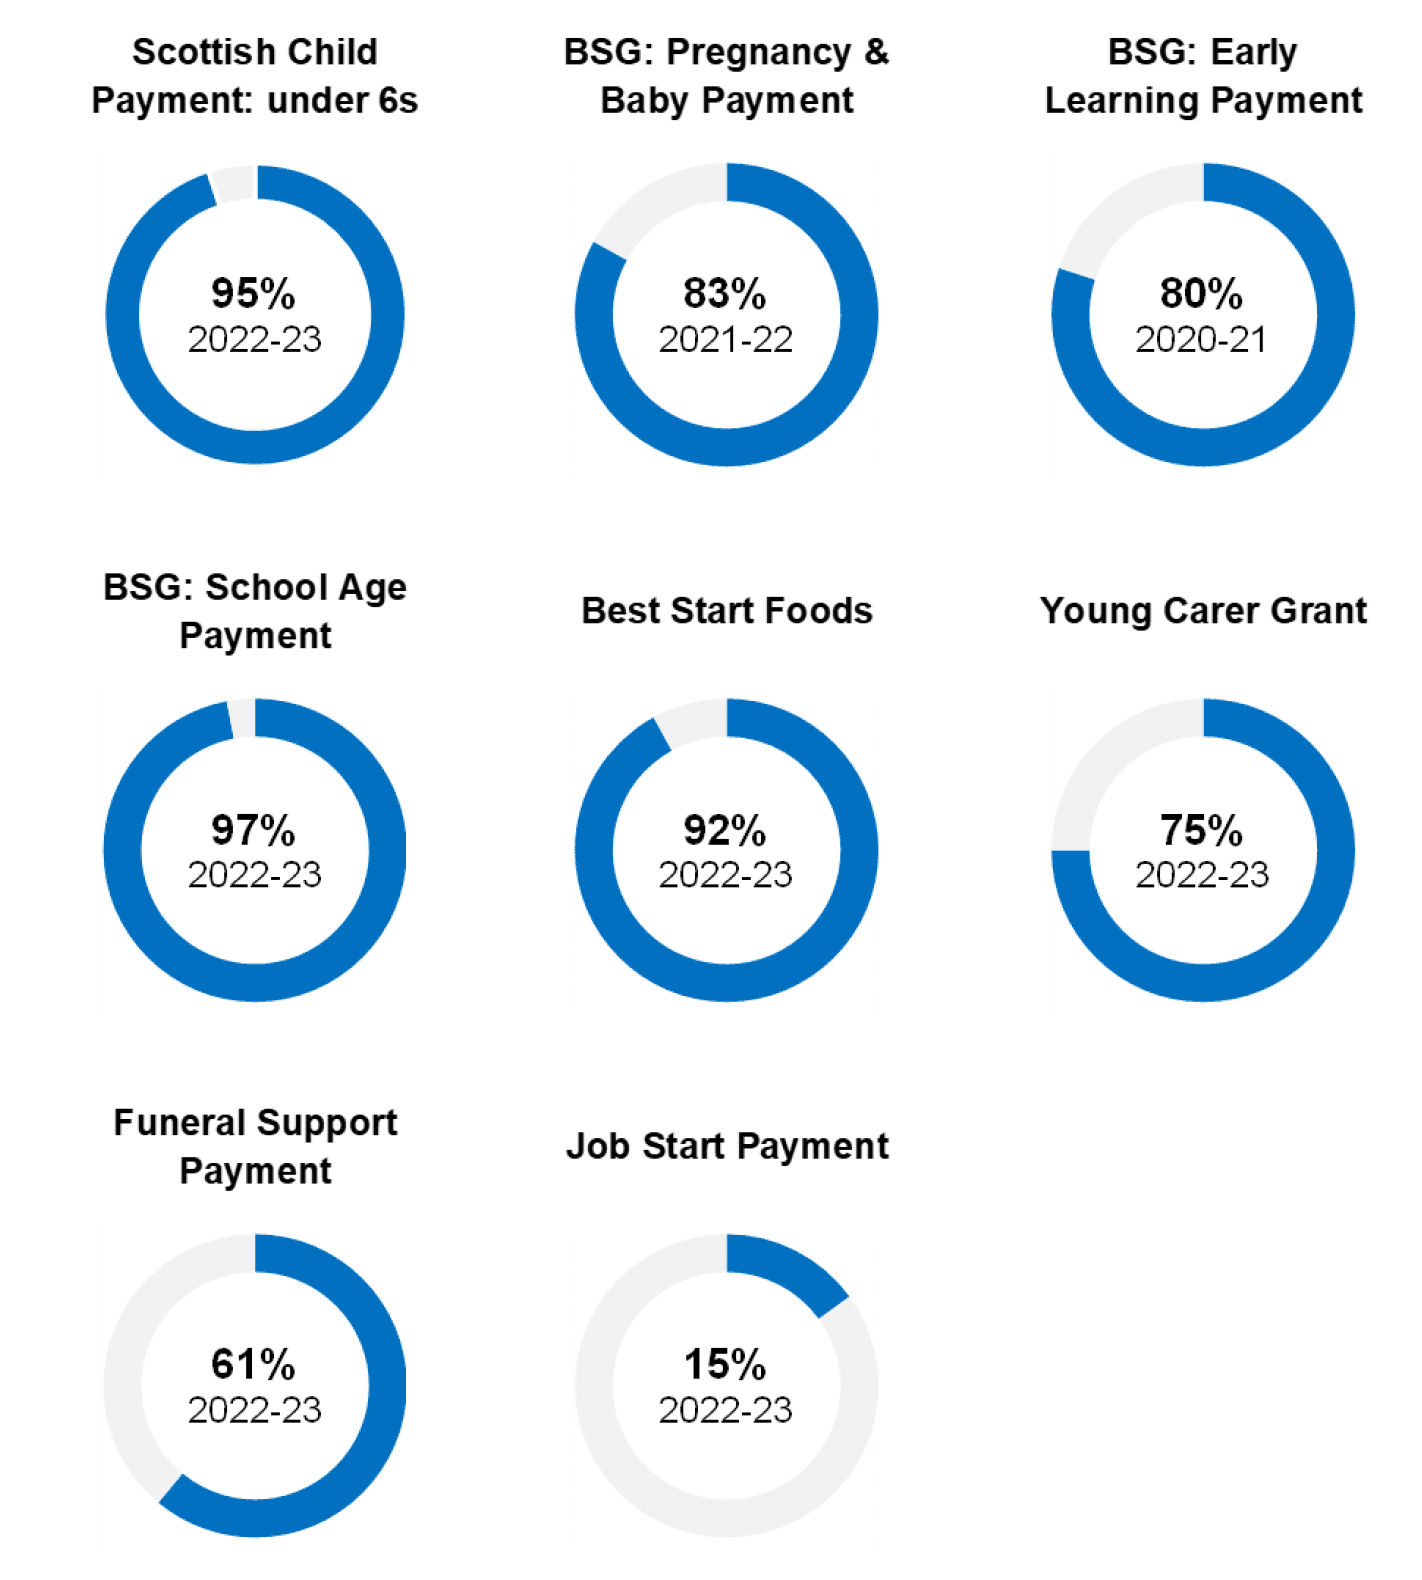 An infographic outlining the estimated take-up rates in 2022-23, represented by doughnut charts: Scottish Child Payment: under 6s: 95%, BSG: Pregnancy and Baby Payment: 83% (2021-22), BSG: Early Learning Payment: 80% (2020-21), BSG: School Age Payment: 97%, Best Start Foods: 92%, Young Carer Grant: 75%, Funeral Support Payment: 61%, Job Start Payment: 15%